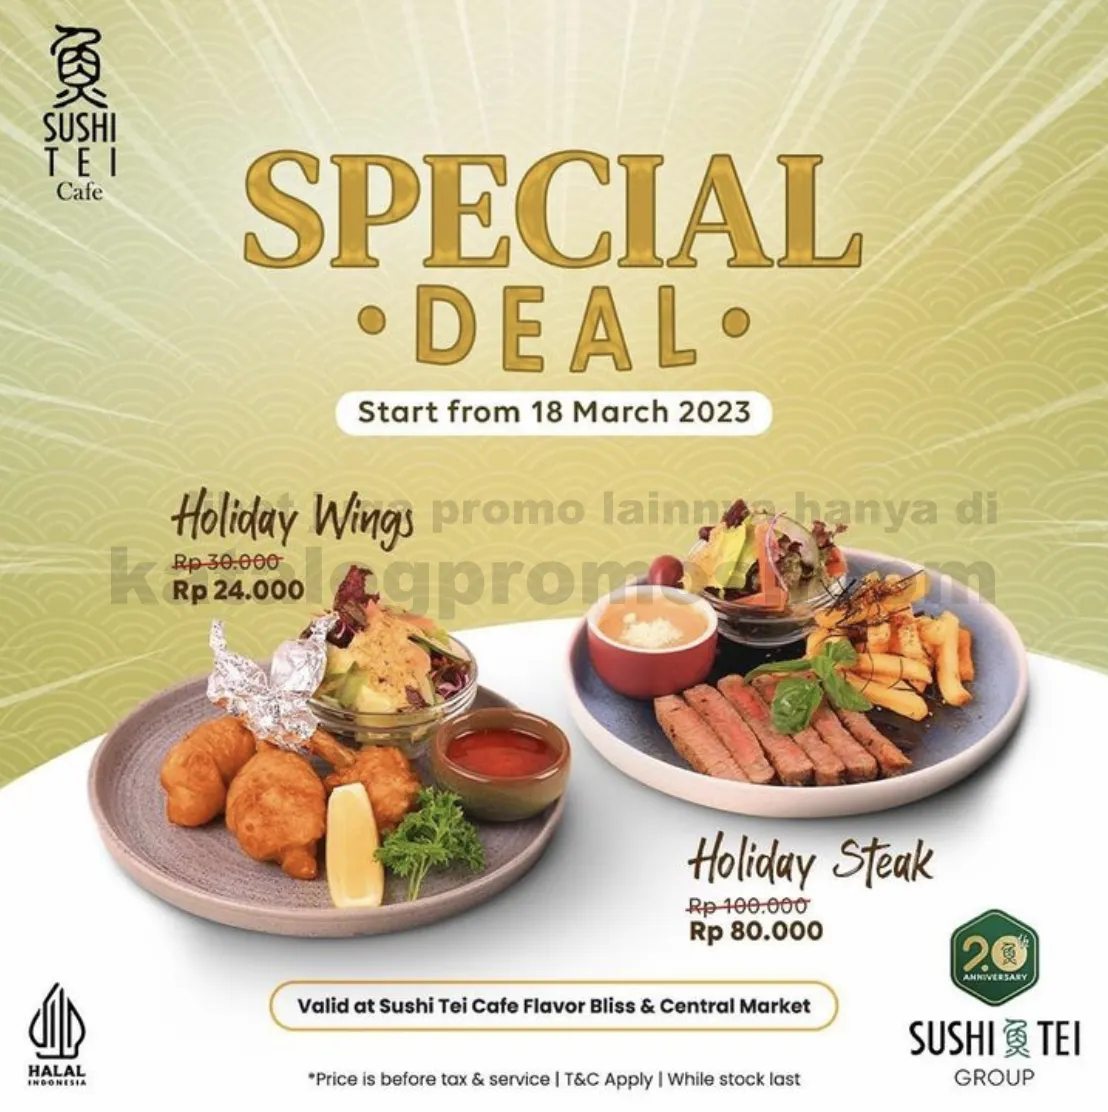 Promo Sushi Tei Cafe Flavor Bliss / Central Market PIK - Special Deal Holiday Steak & Holiday Wings